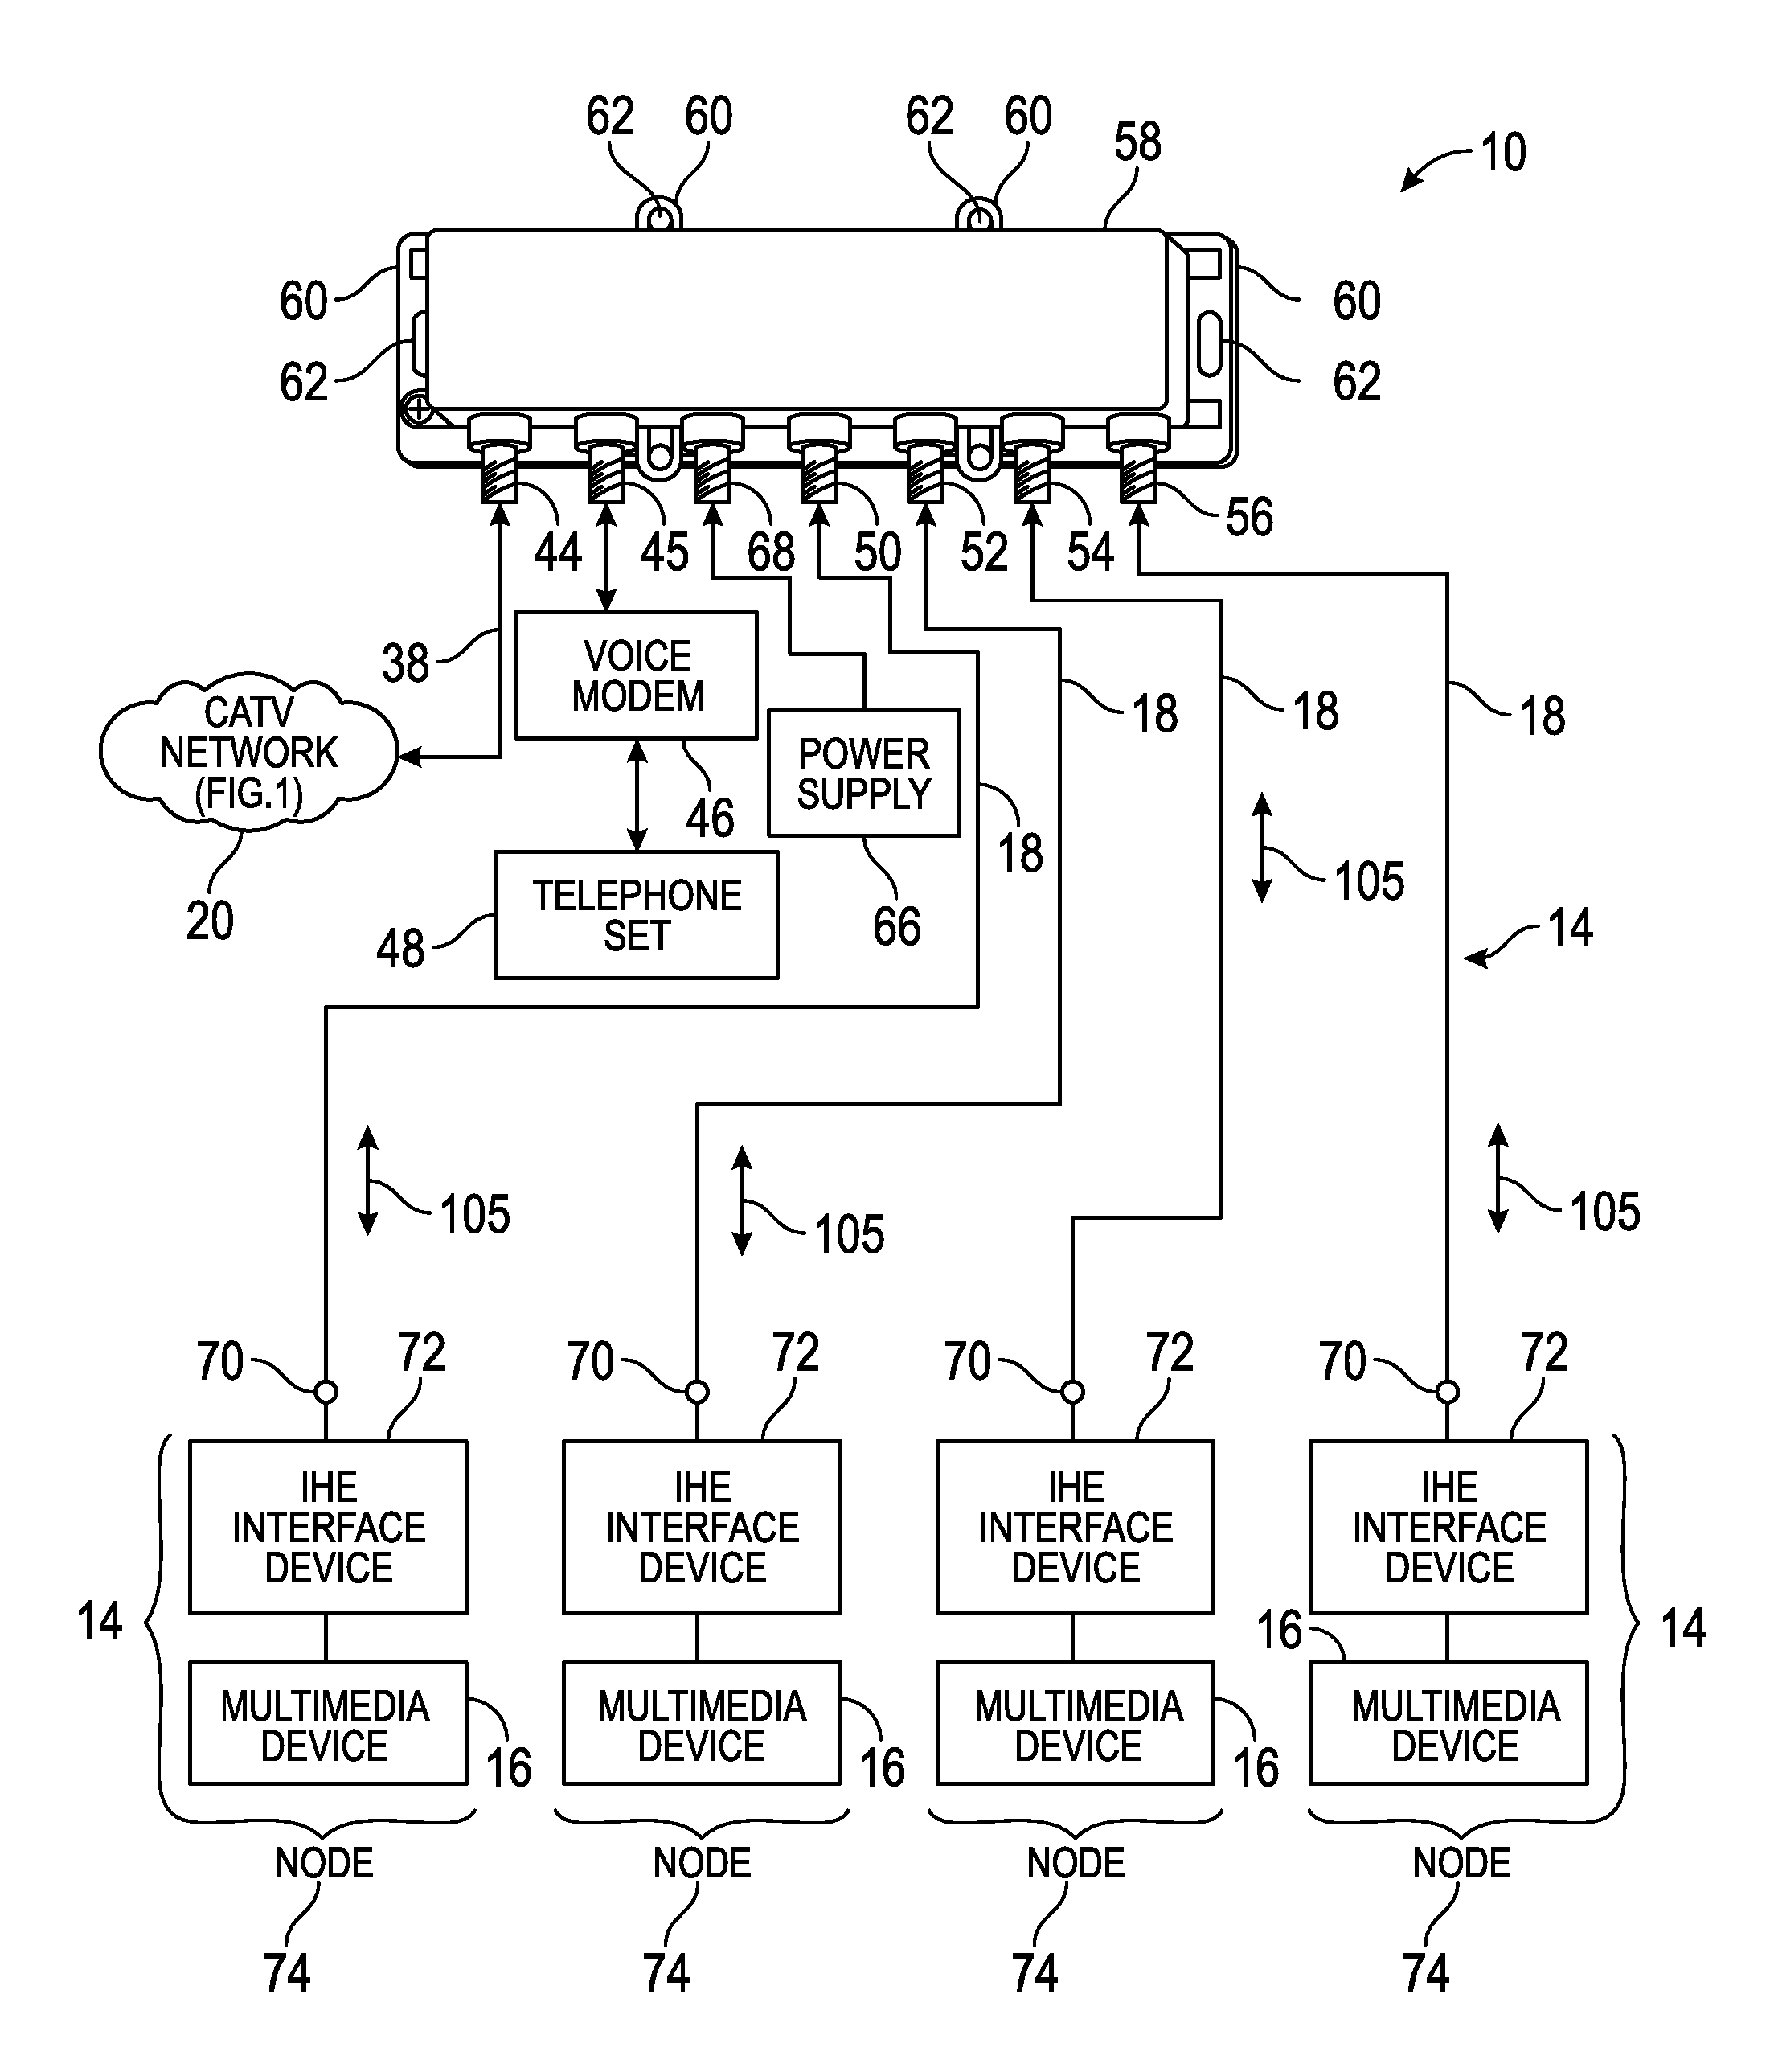 CATV Entry Adapter and Method for Distributing CATV and In-Home Entertainment Signals